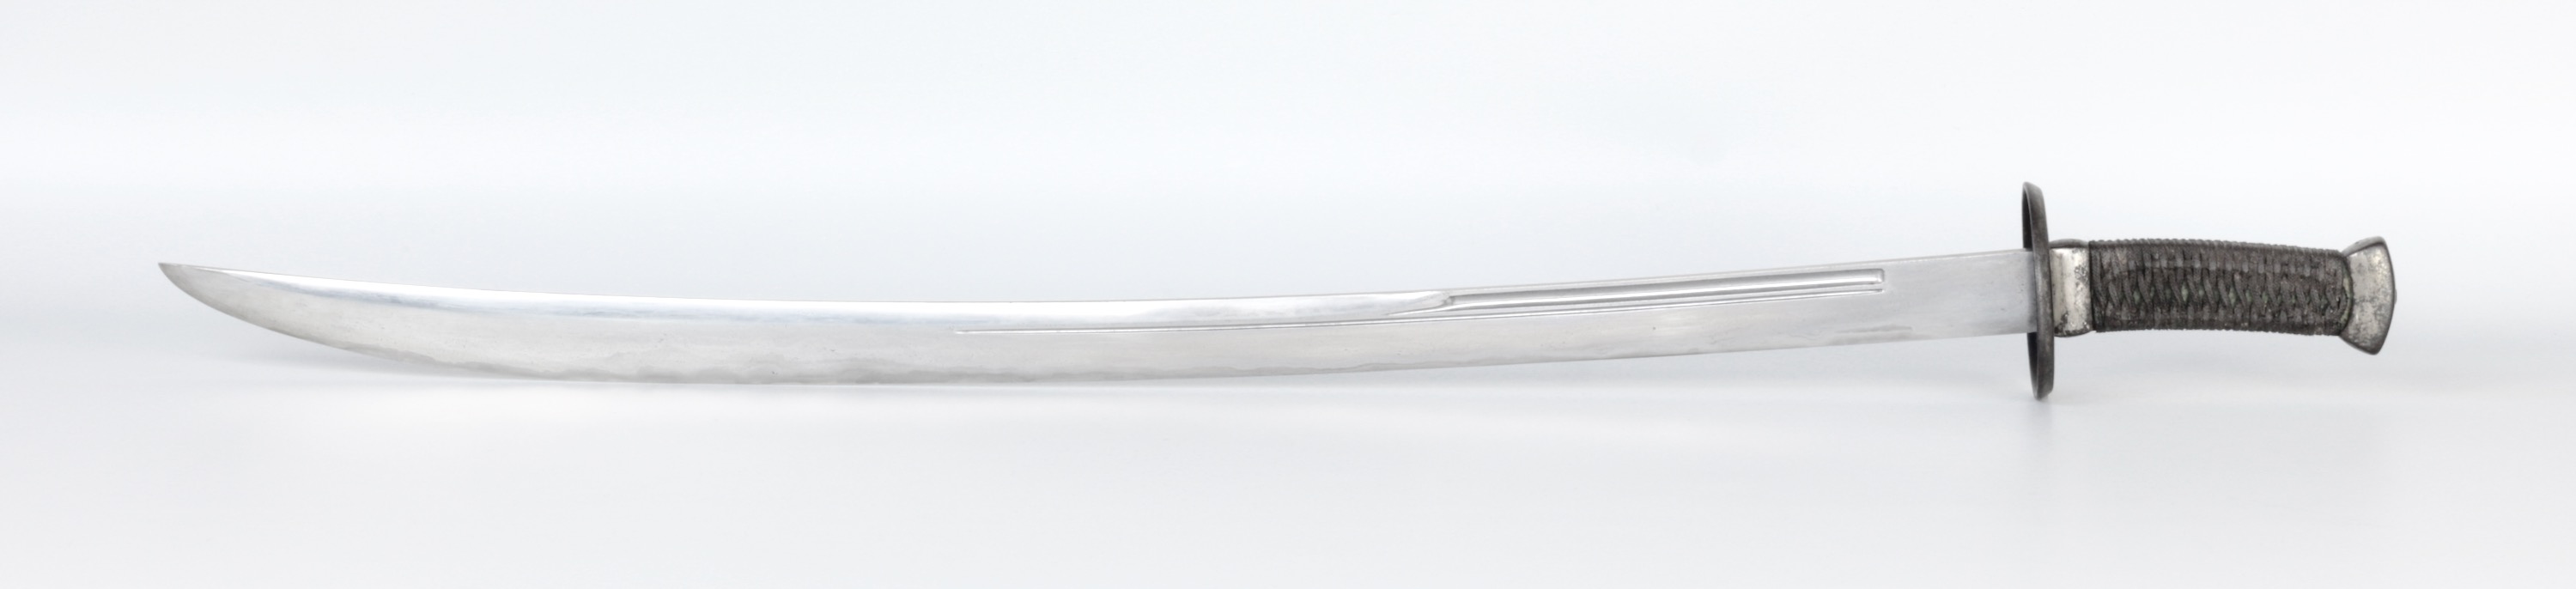 Liuyedao with naginata grooves